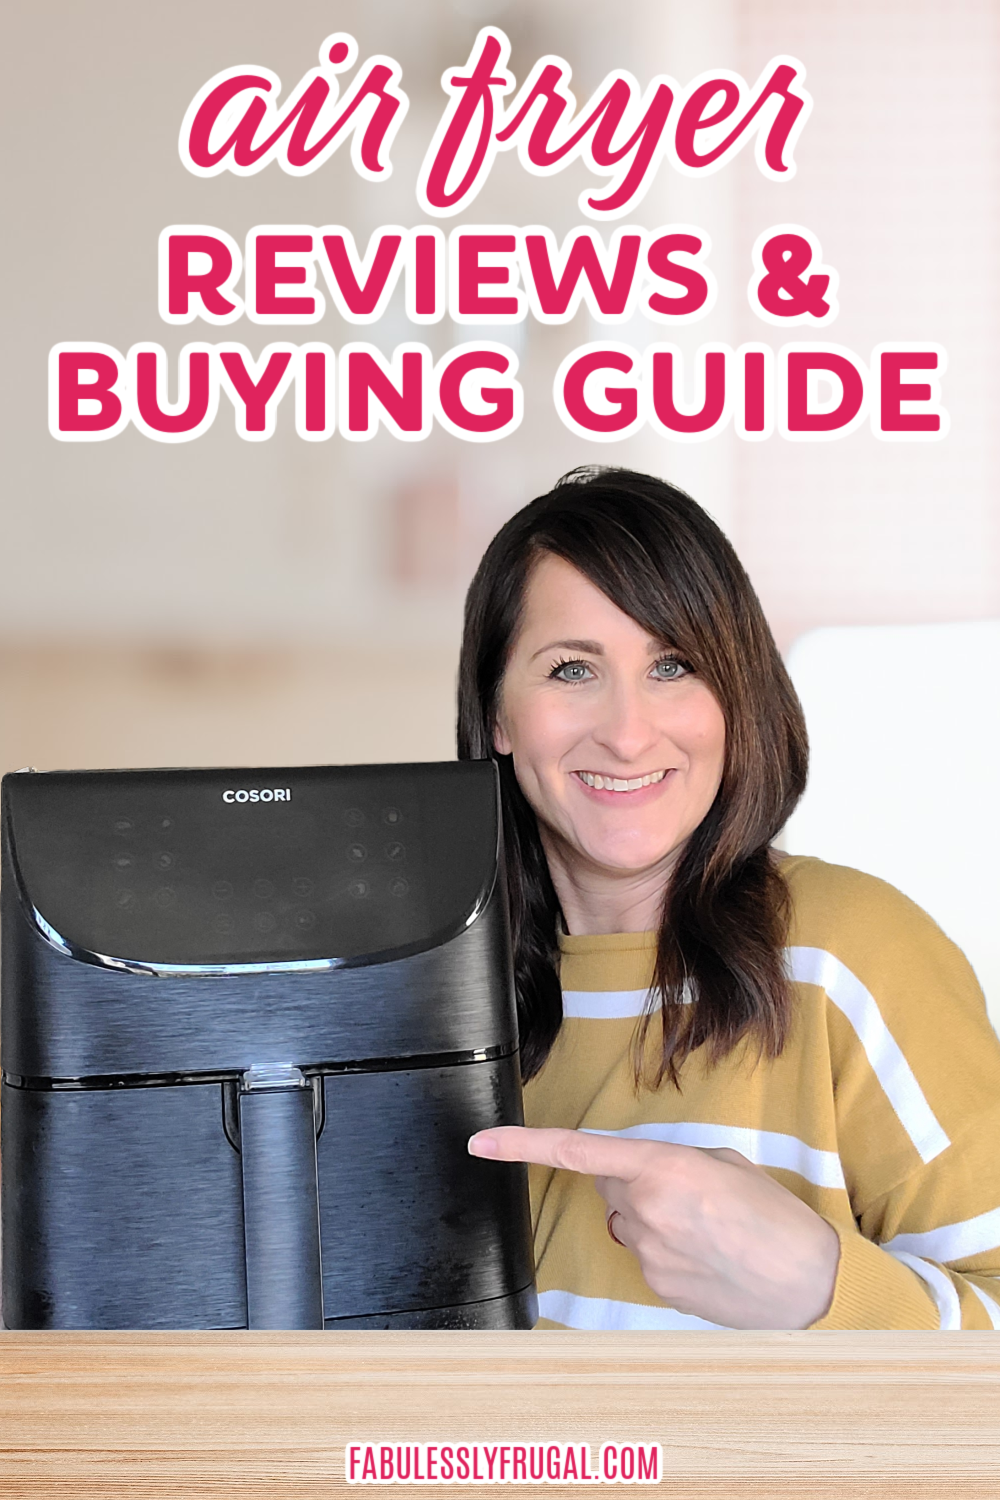 https://fabulesslyfrugal.com/wp-content/uploads/2022/11/air-fryer-reviews-and-buying-guides-Pinterest-Pin.png